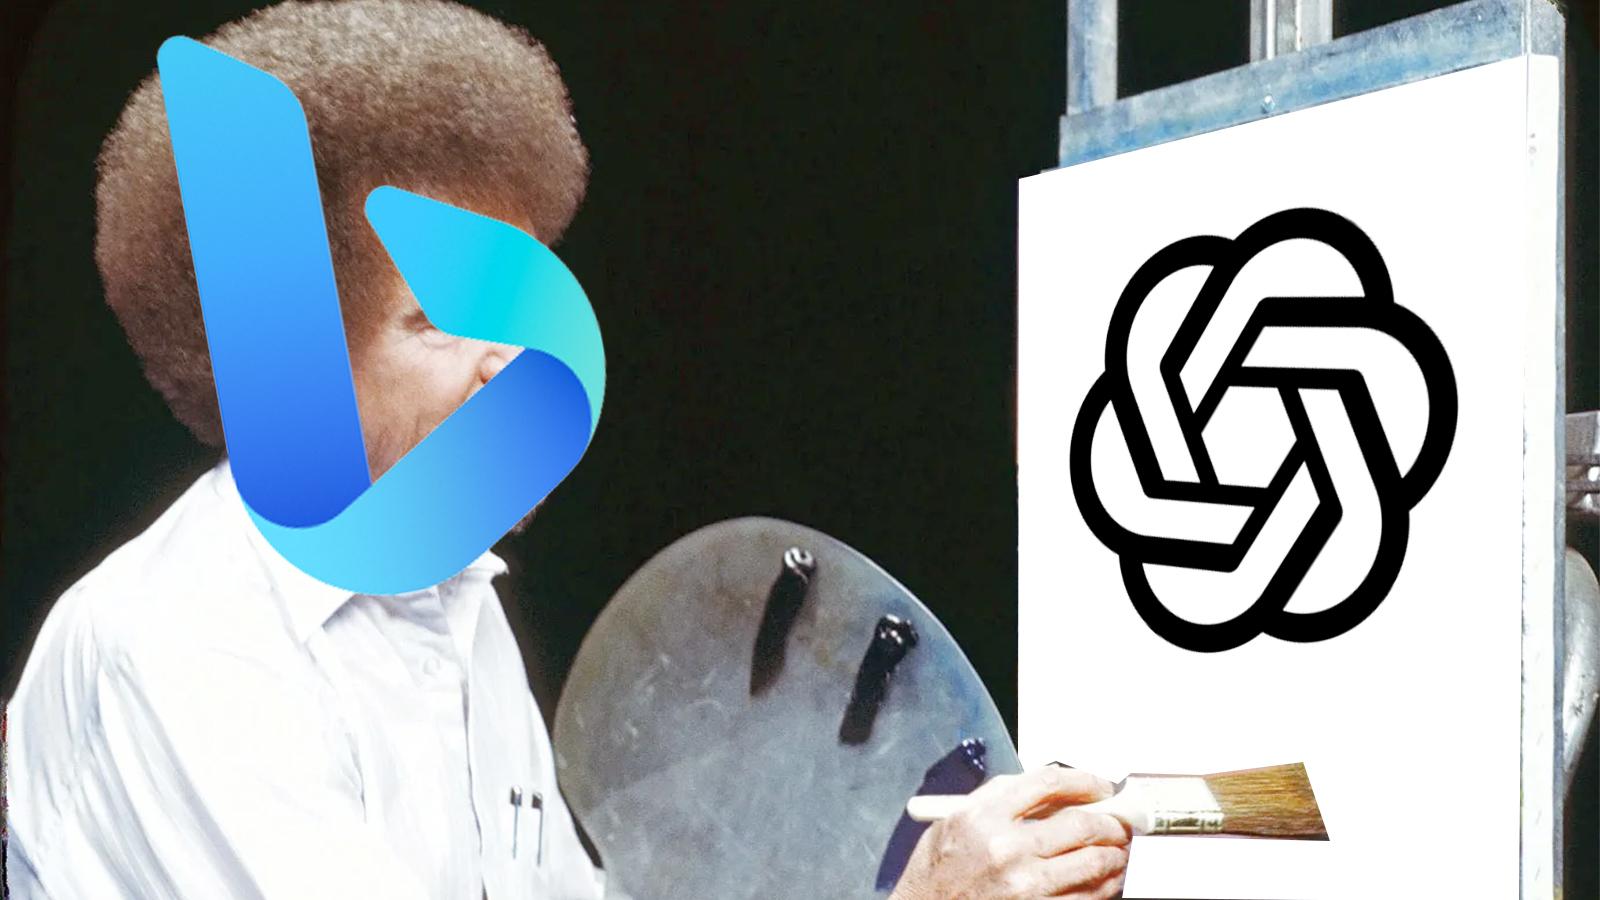 bob ross parody of bing painting and the openai logo on the page